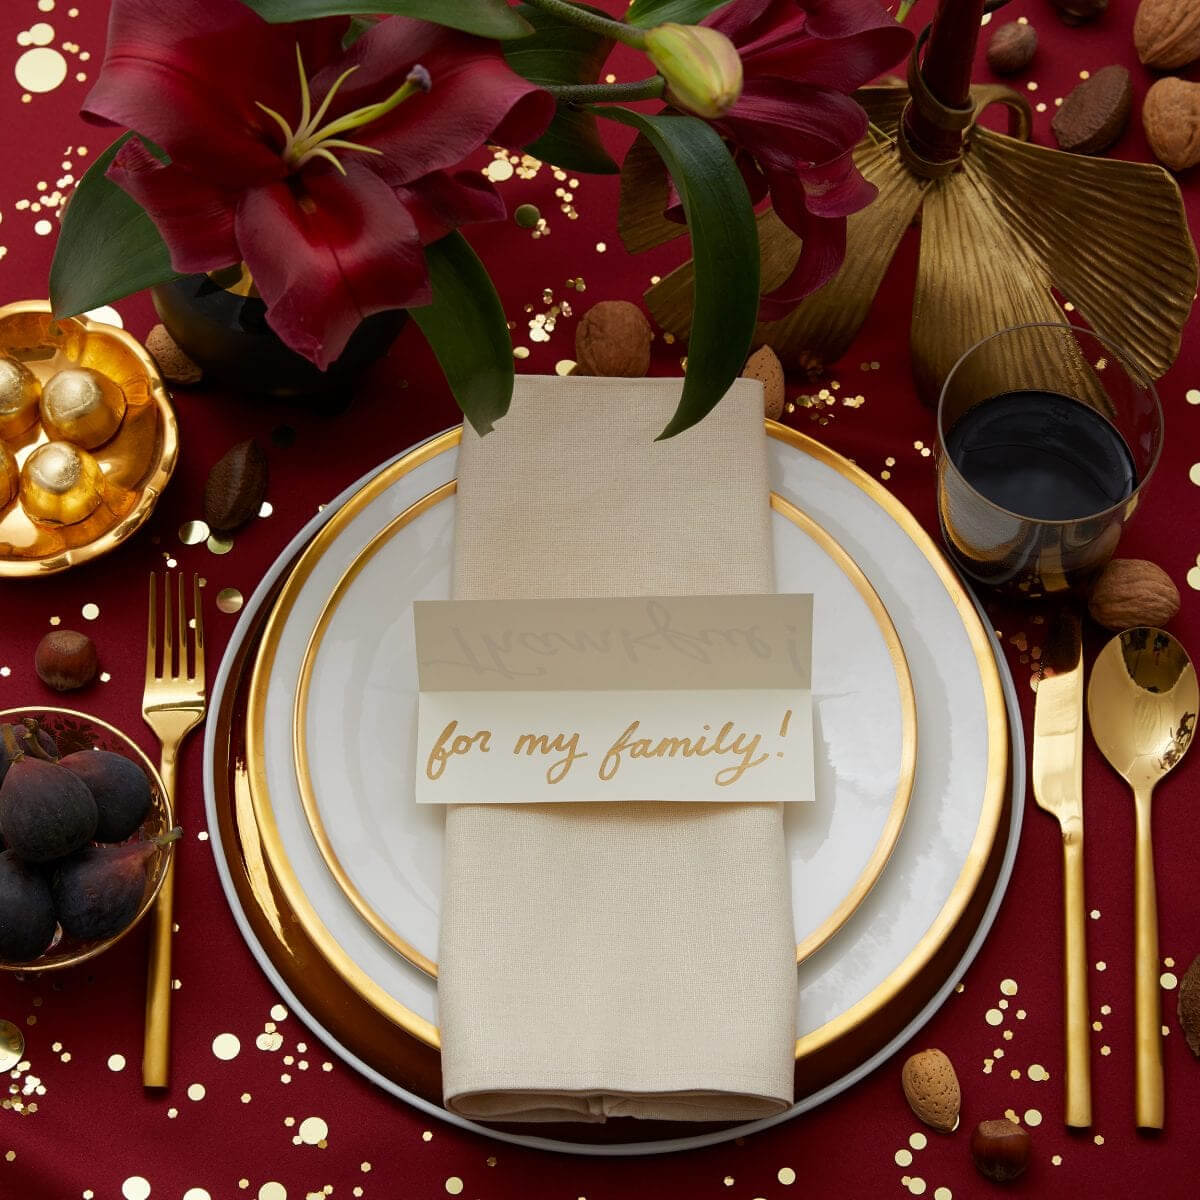 Thankful Table Card | Darcy Miller Designs Inside Thanksgiving Place Card Templates